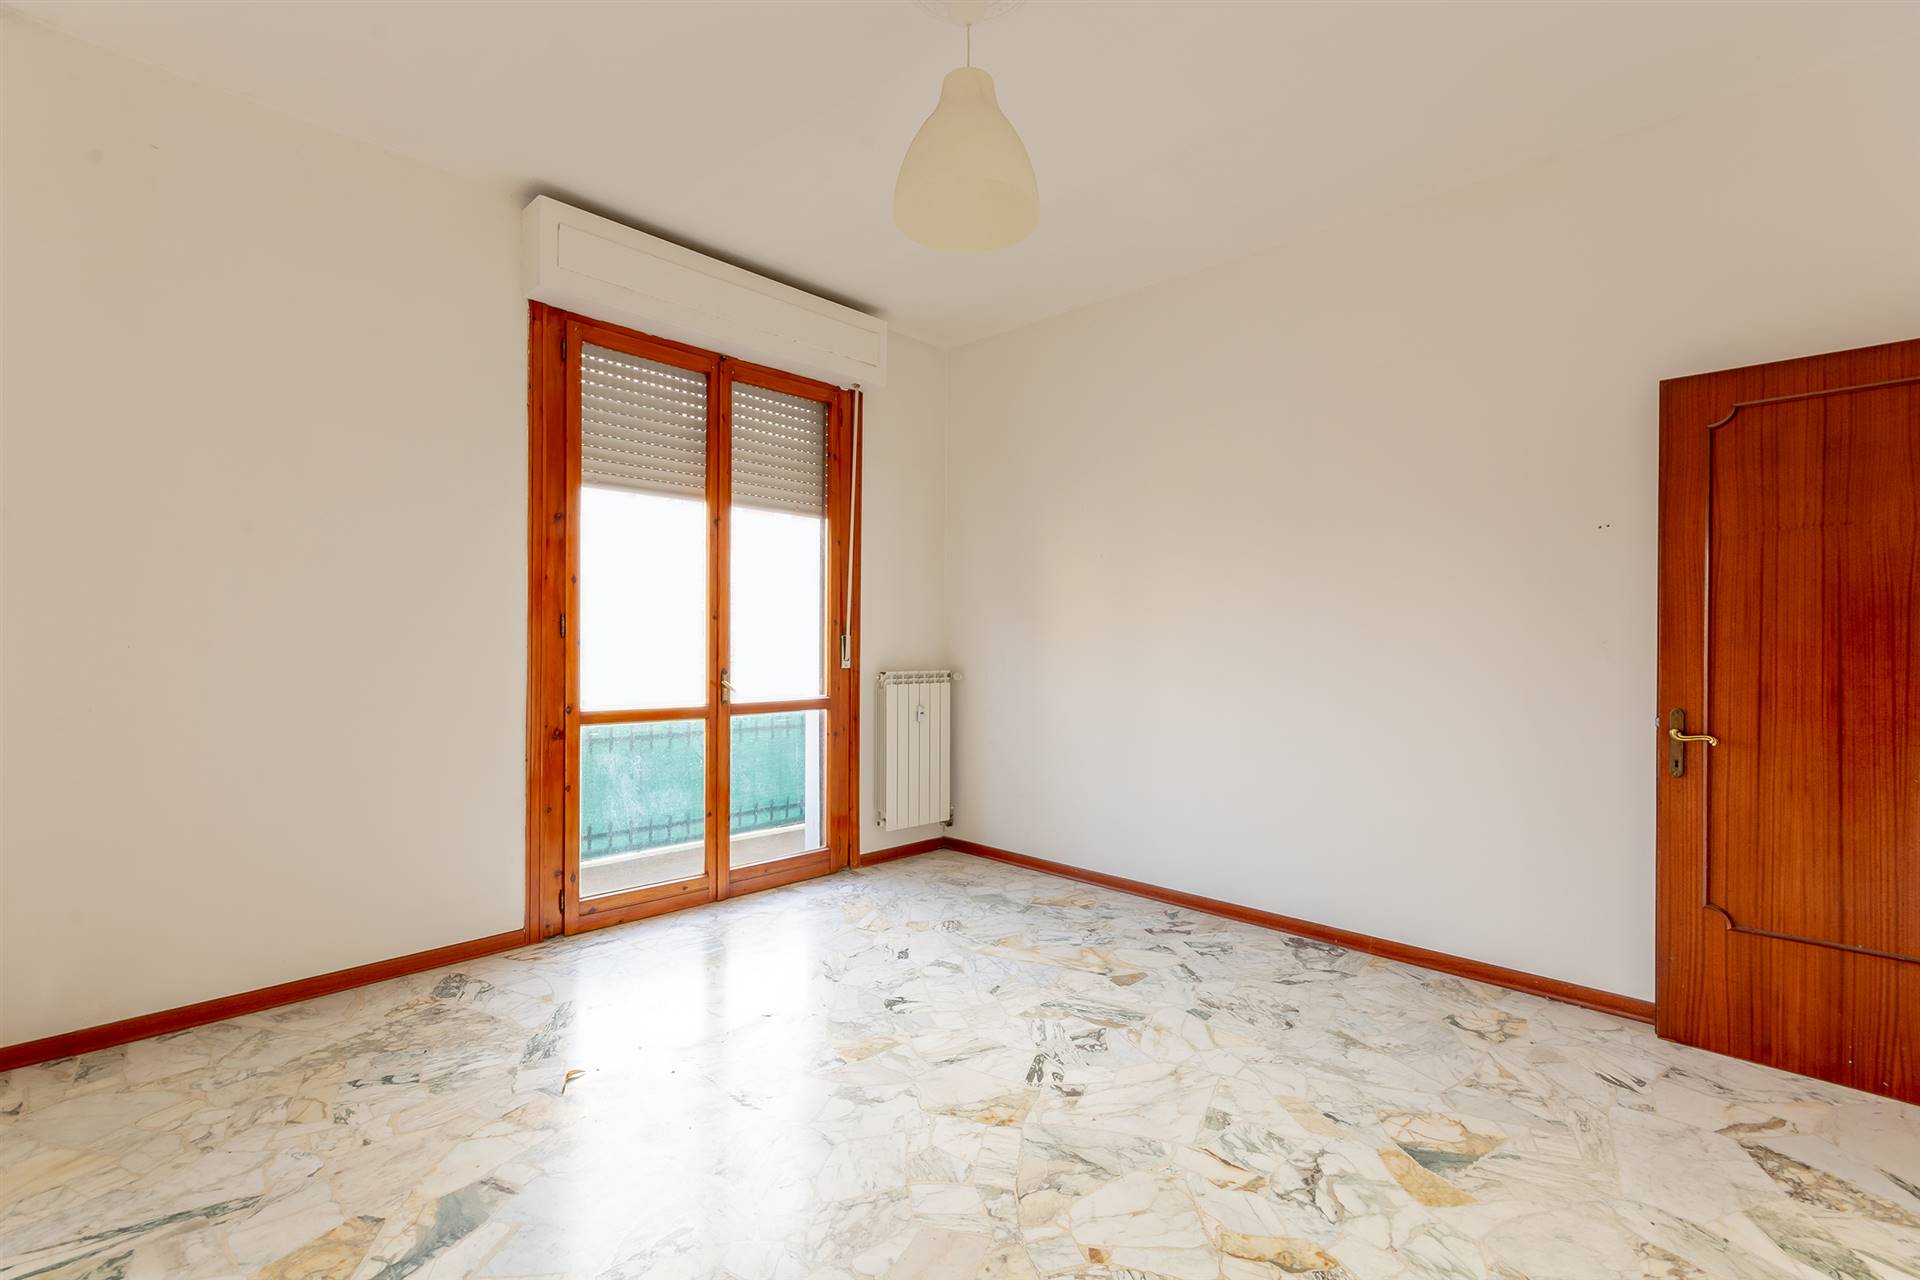 ALDO MORO, CAMPI BISENZIO, Apartment for sale of 76 Sq. mt., Habitable, Heating Centralized, Energetic class: G, placed at 2° on 4, composed by: 3 